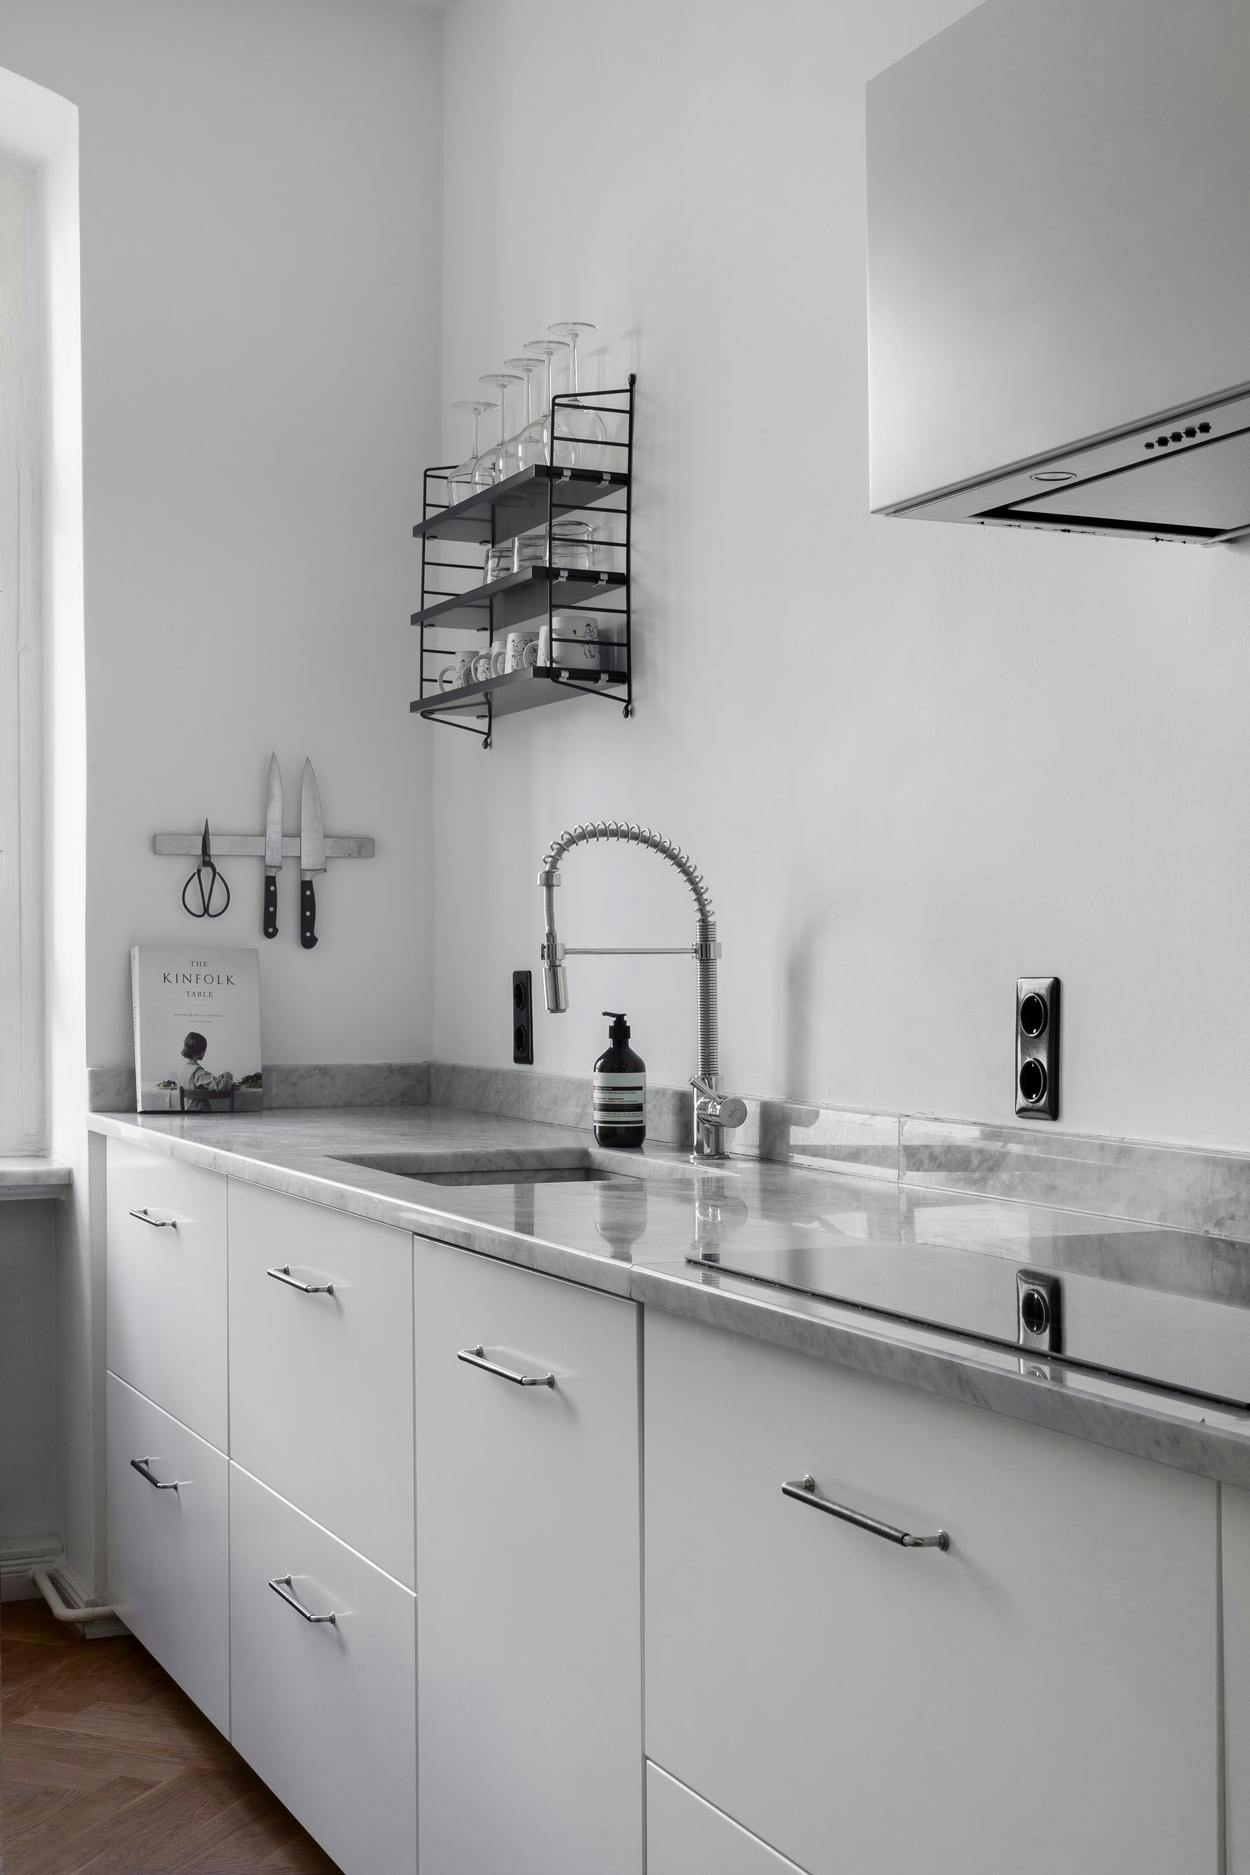 The image features a clean, modern kitchen with white cabinets and a stainless steel sink.